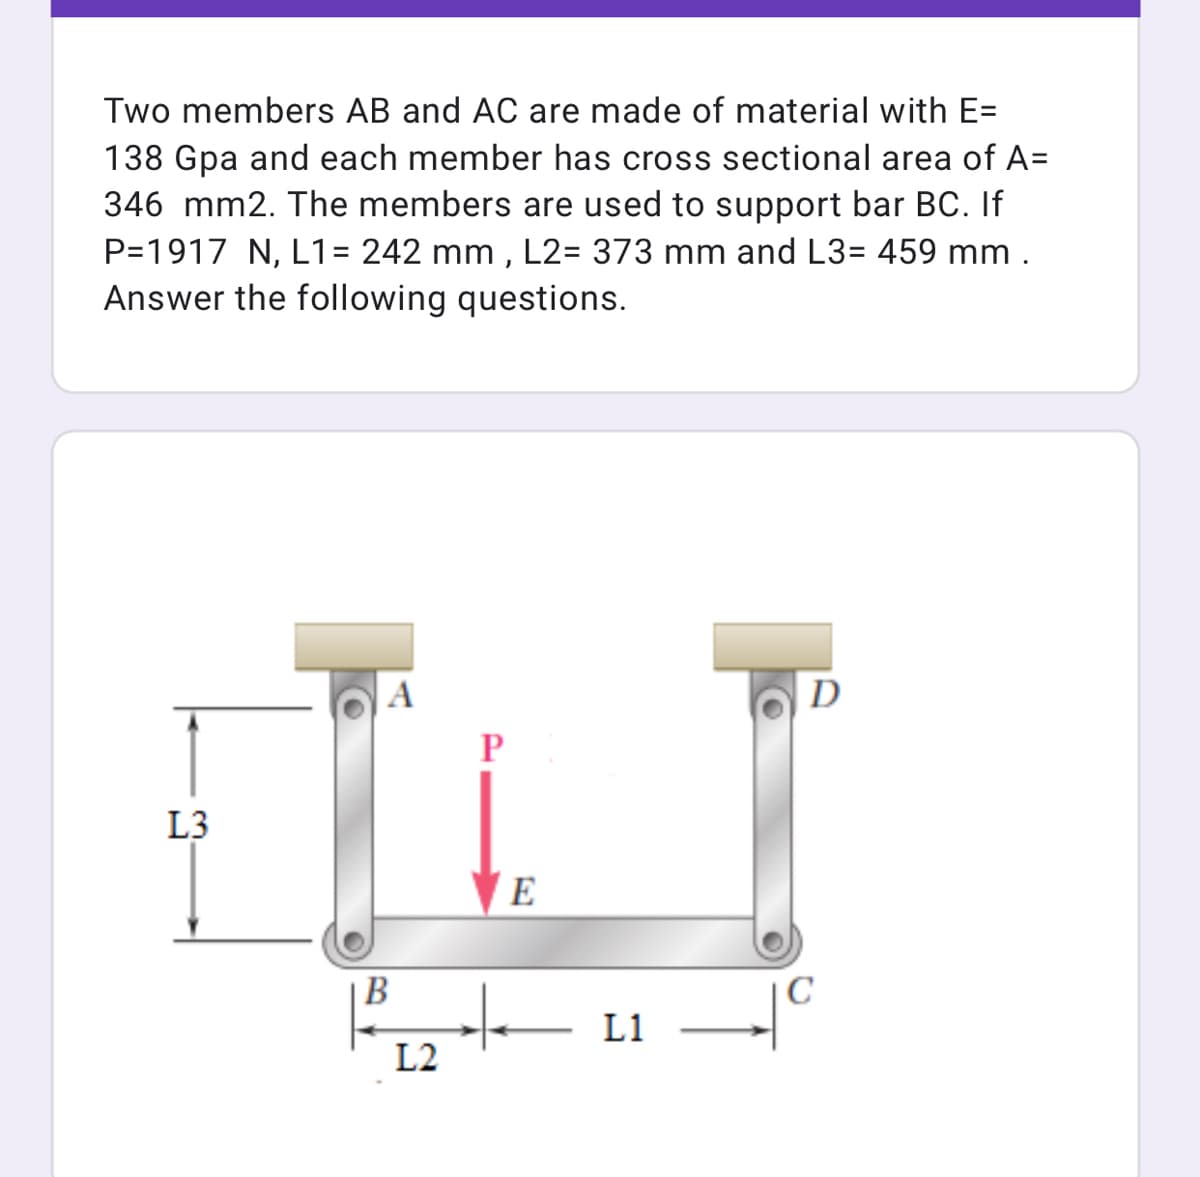 Two members AB and AC are made of material with E=
138 Gpa and each member has cross sectional area of A=
346 mm2. The members are used to support bar BC. If
P=1917 N, L1= 242 mm , L2= 373 mm and L3= 459 mm .
Answer the following questions.
A
D
P
L3
E
|B
L1
L2
